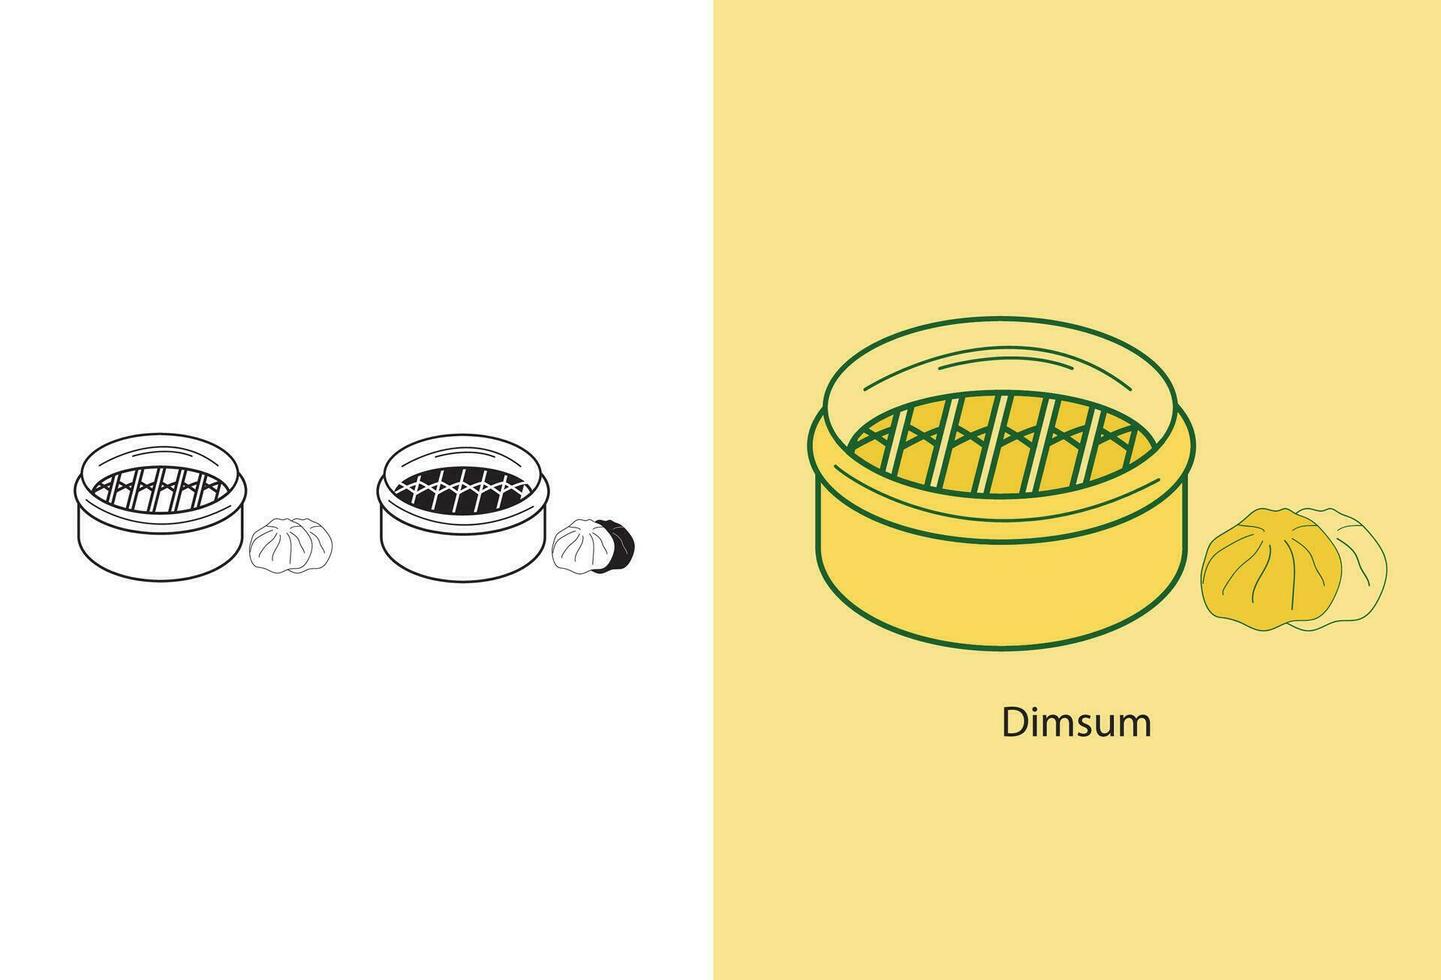 dimsum, The vector icon depicts traditional Chinese food served on a plate, featuring various Asian delicacies such as Chinese cuisine, Asian bakery items with fillings, steamed buns,